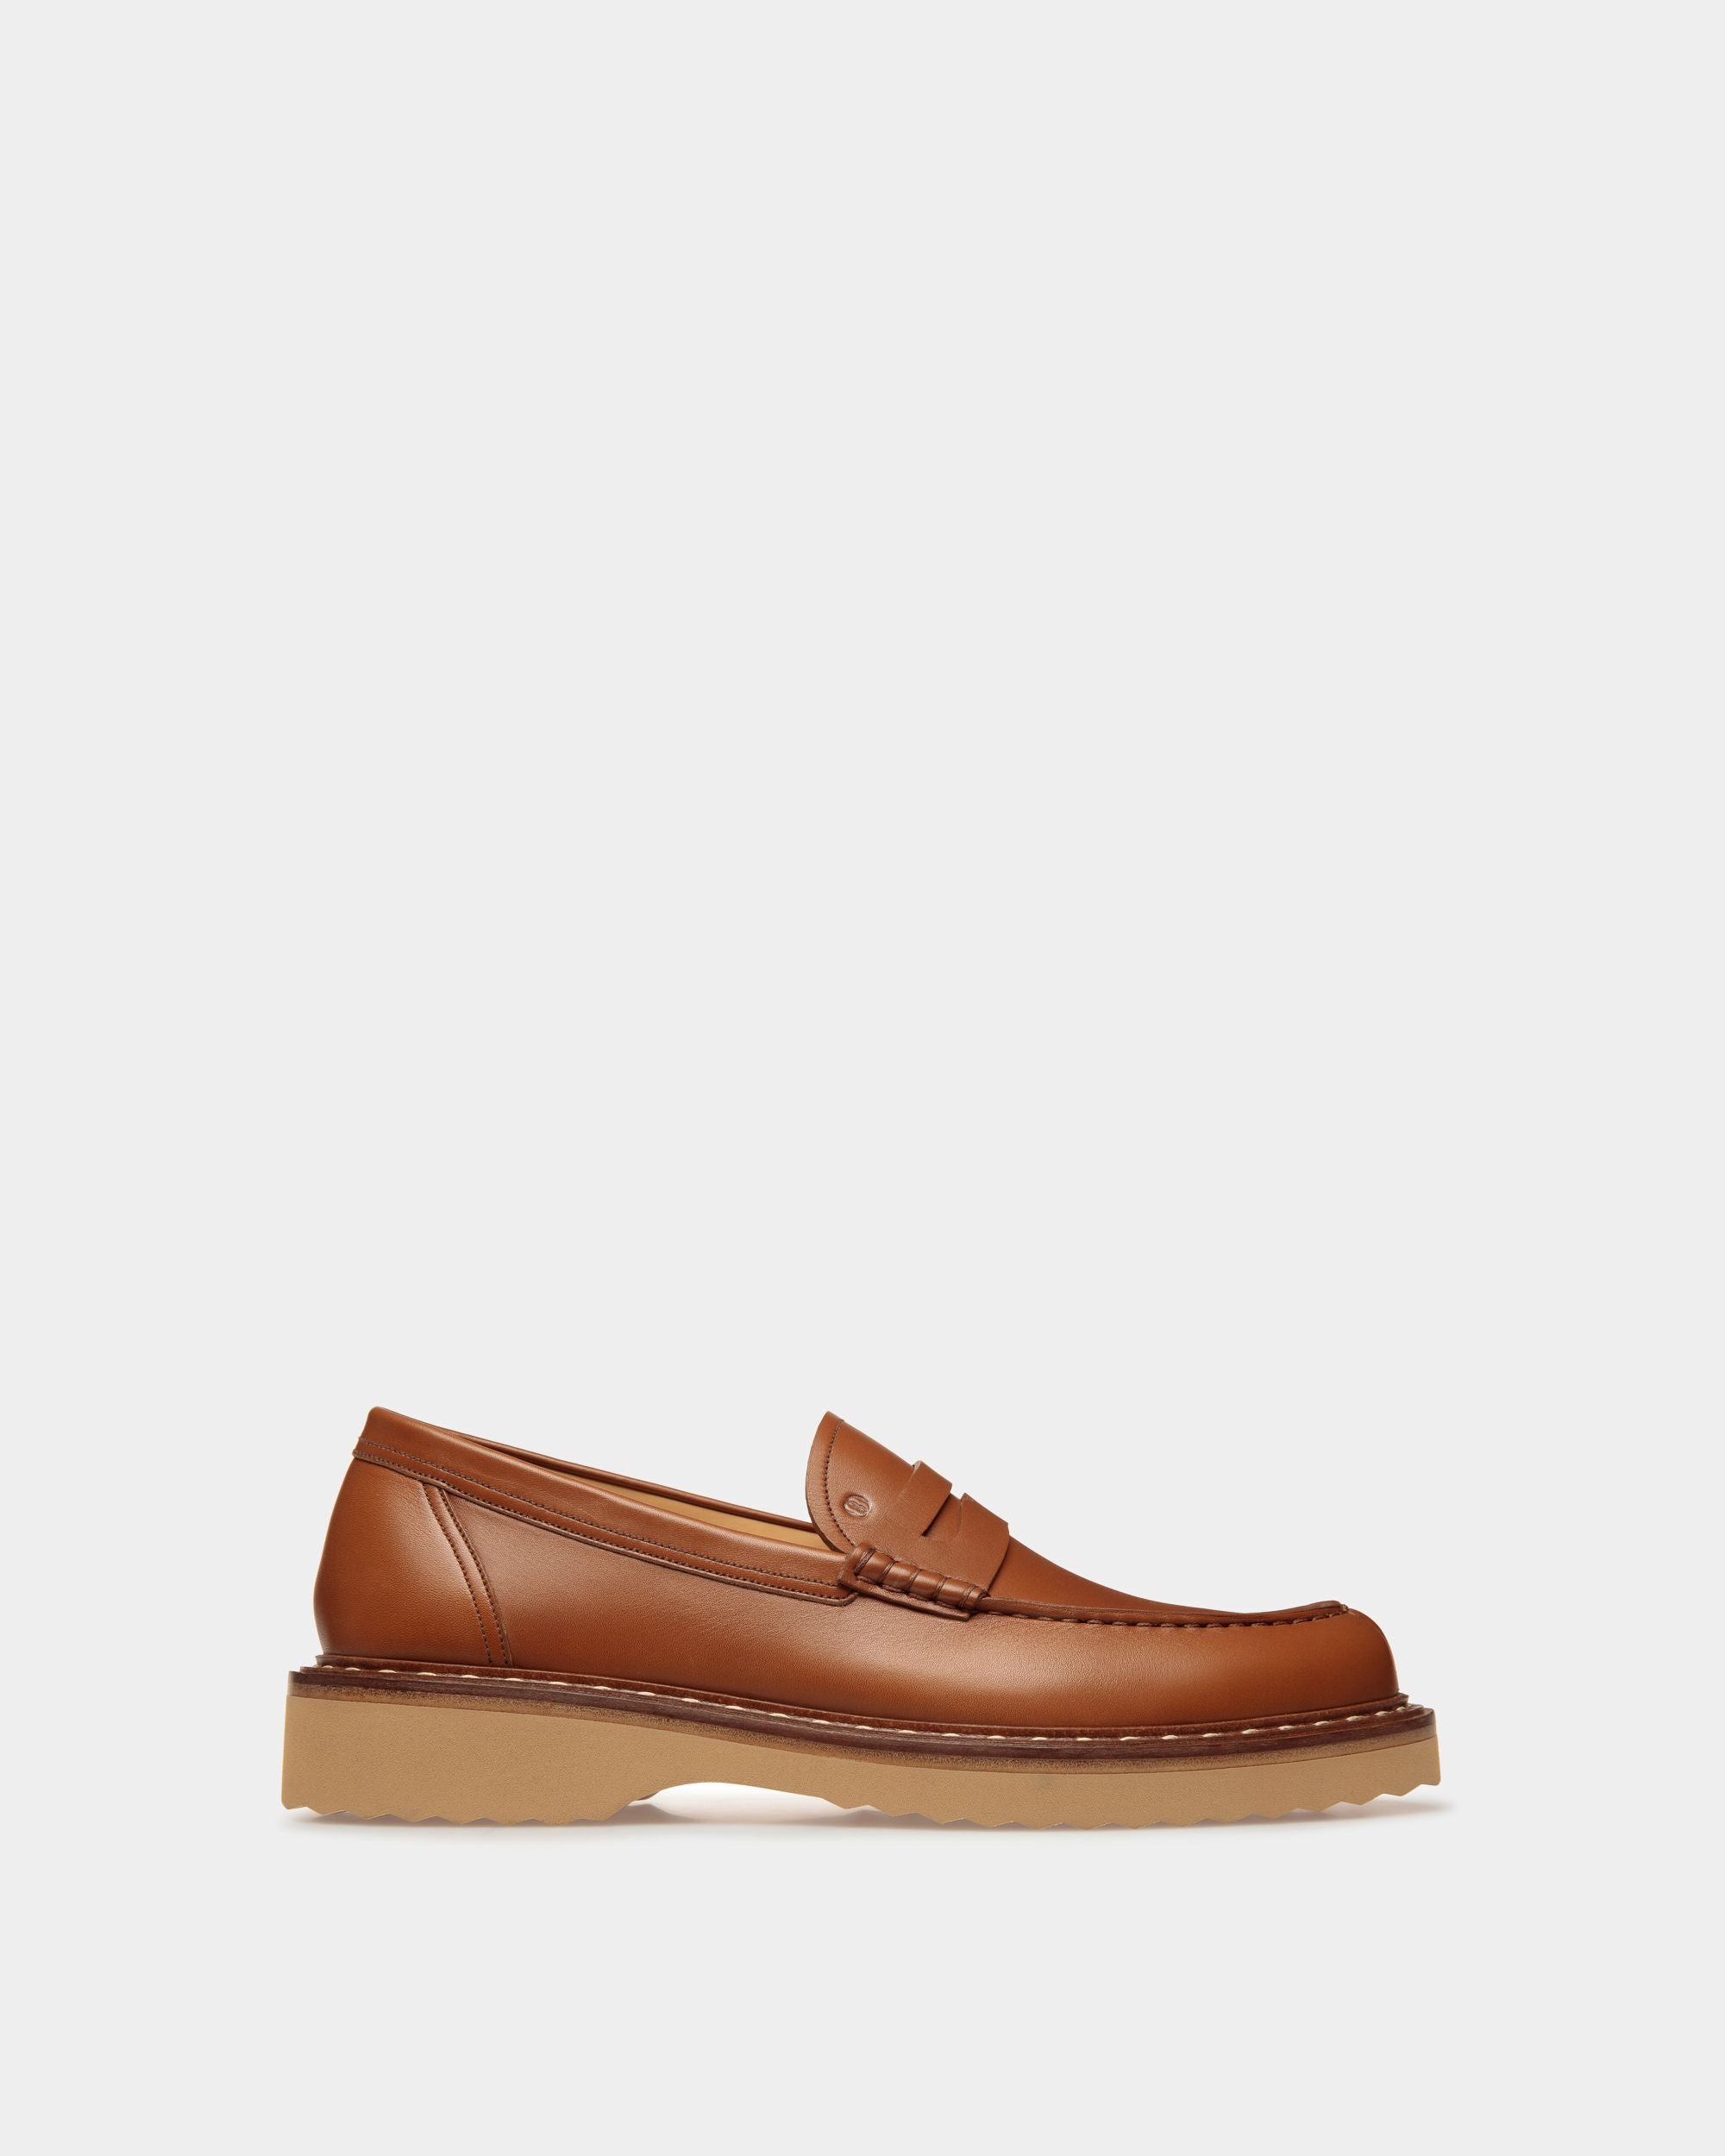 Necko | Men's Loafers | Brown Leather | Bally | Still Life Side